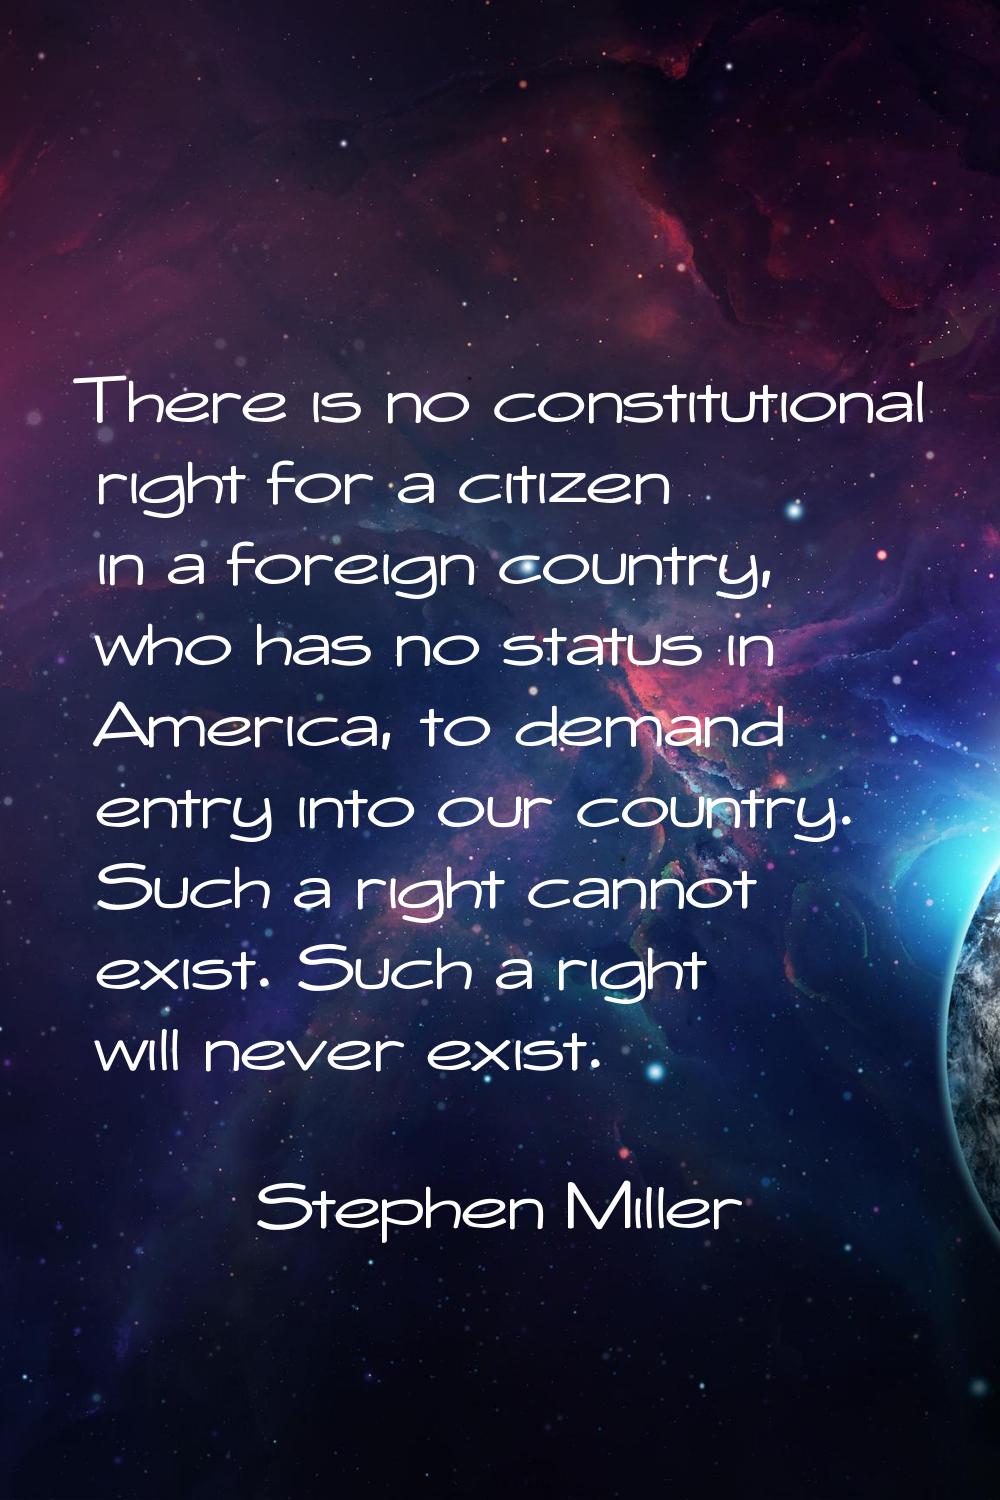 There is no constitutional right for a citizen in a foreign country, who has no status in America, 